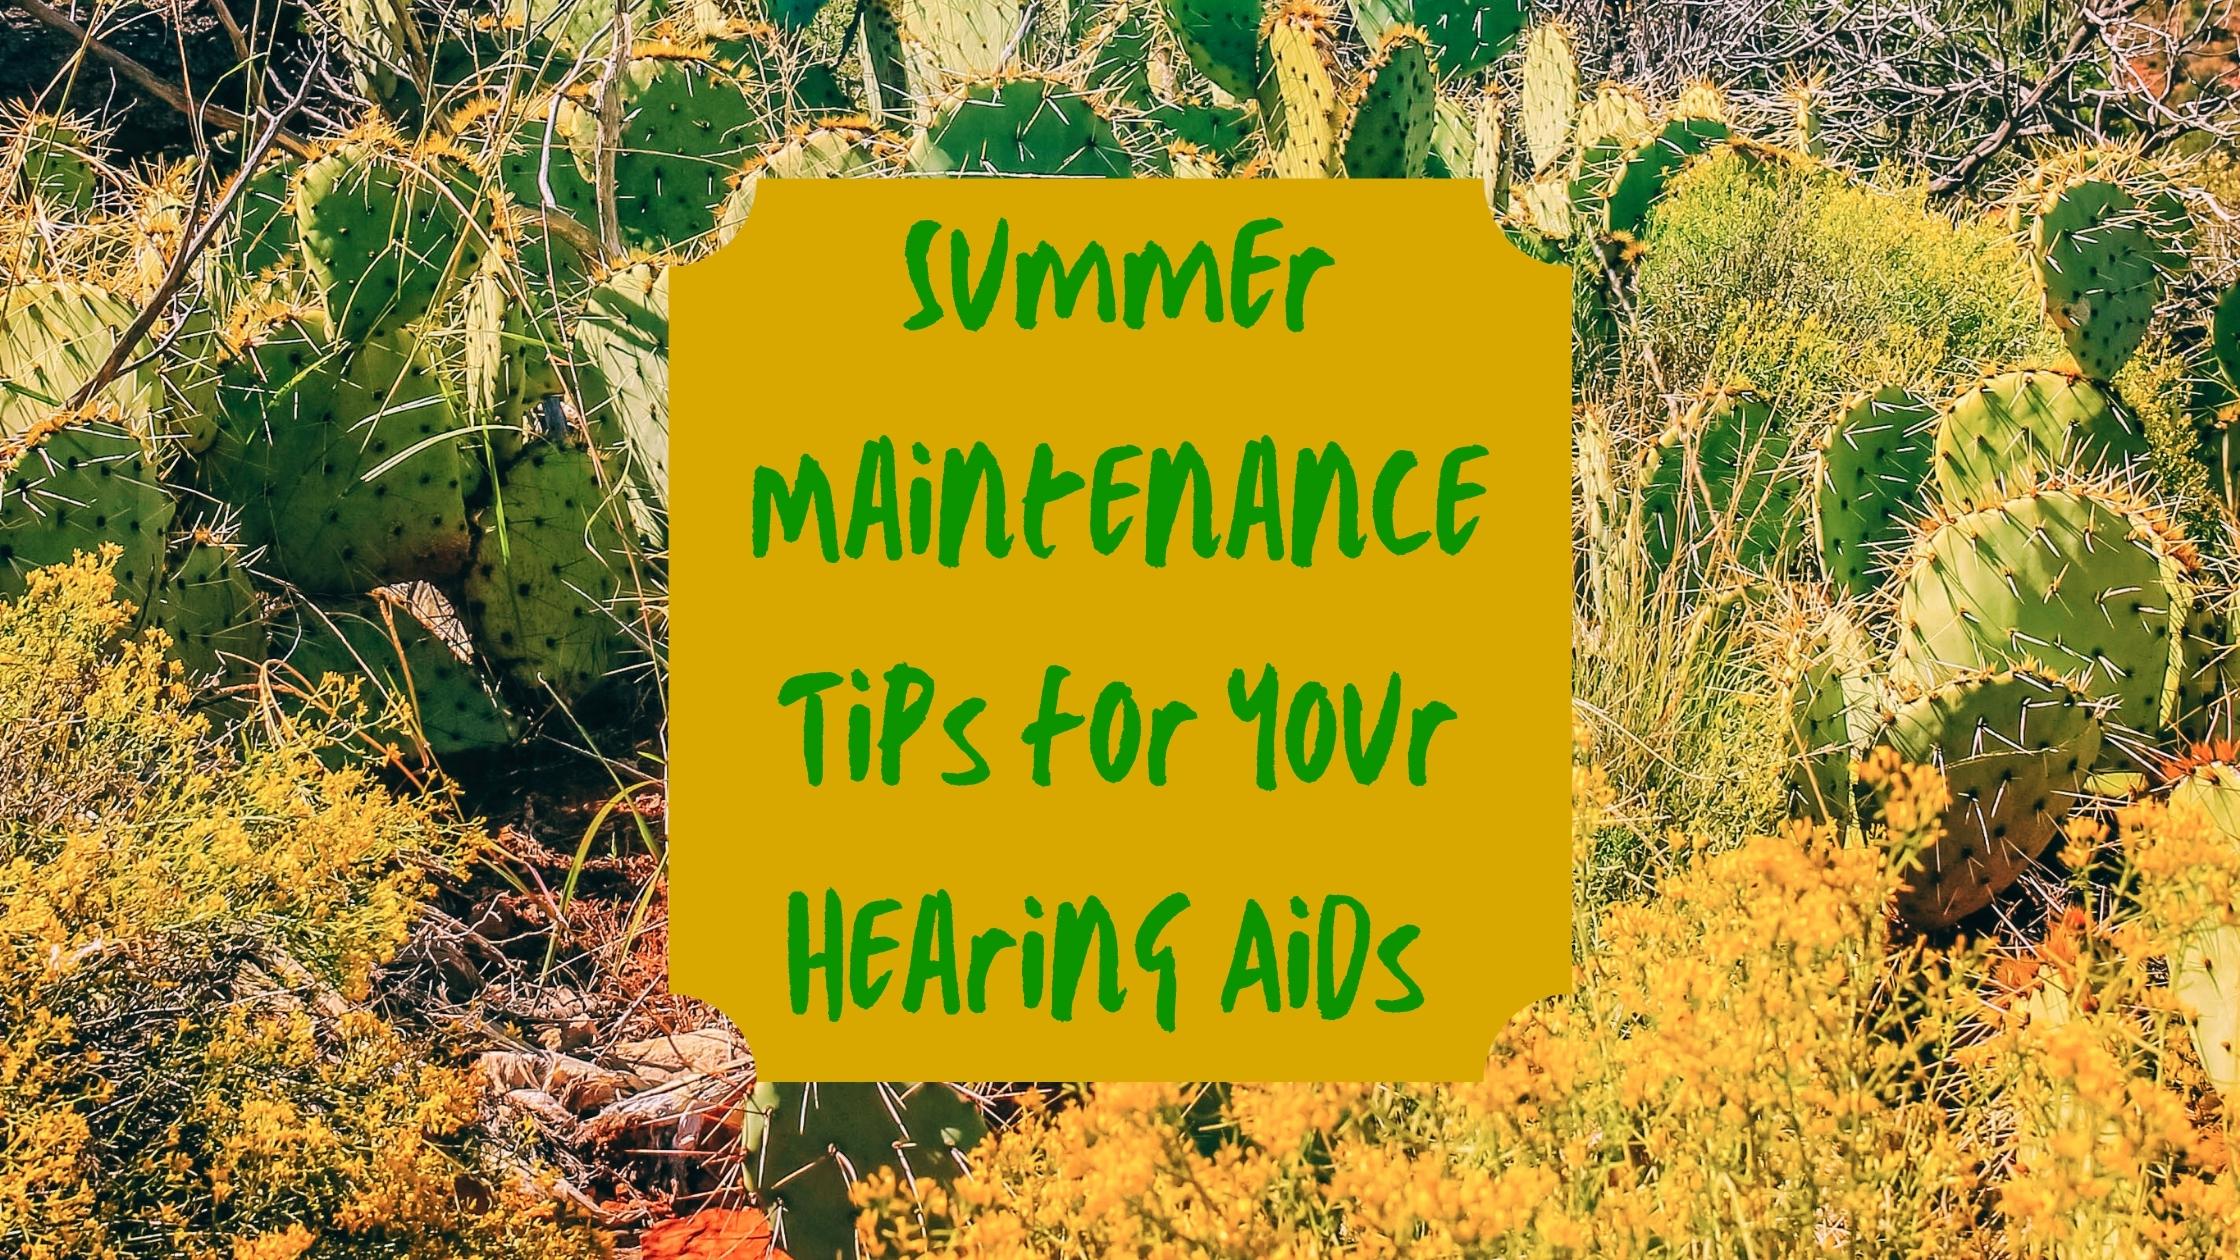 Featured image for “Summer Maintenance Tips for Your Hearing Aids”